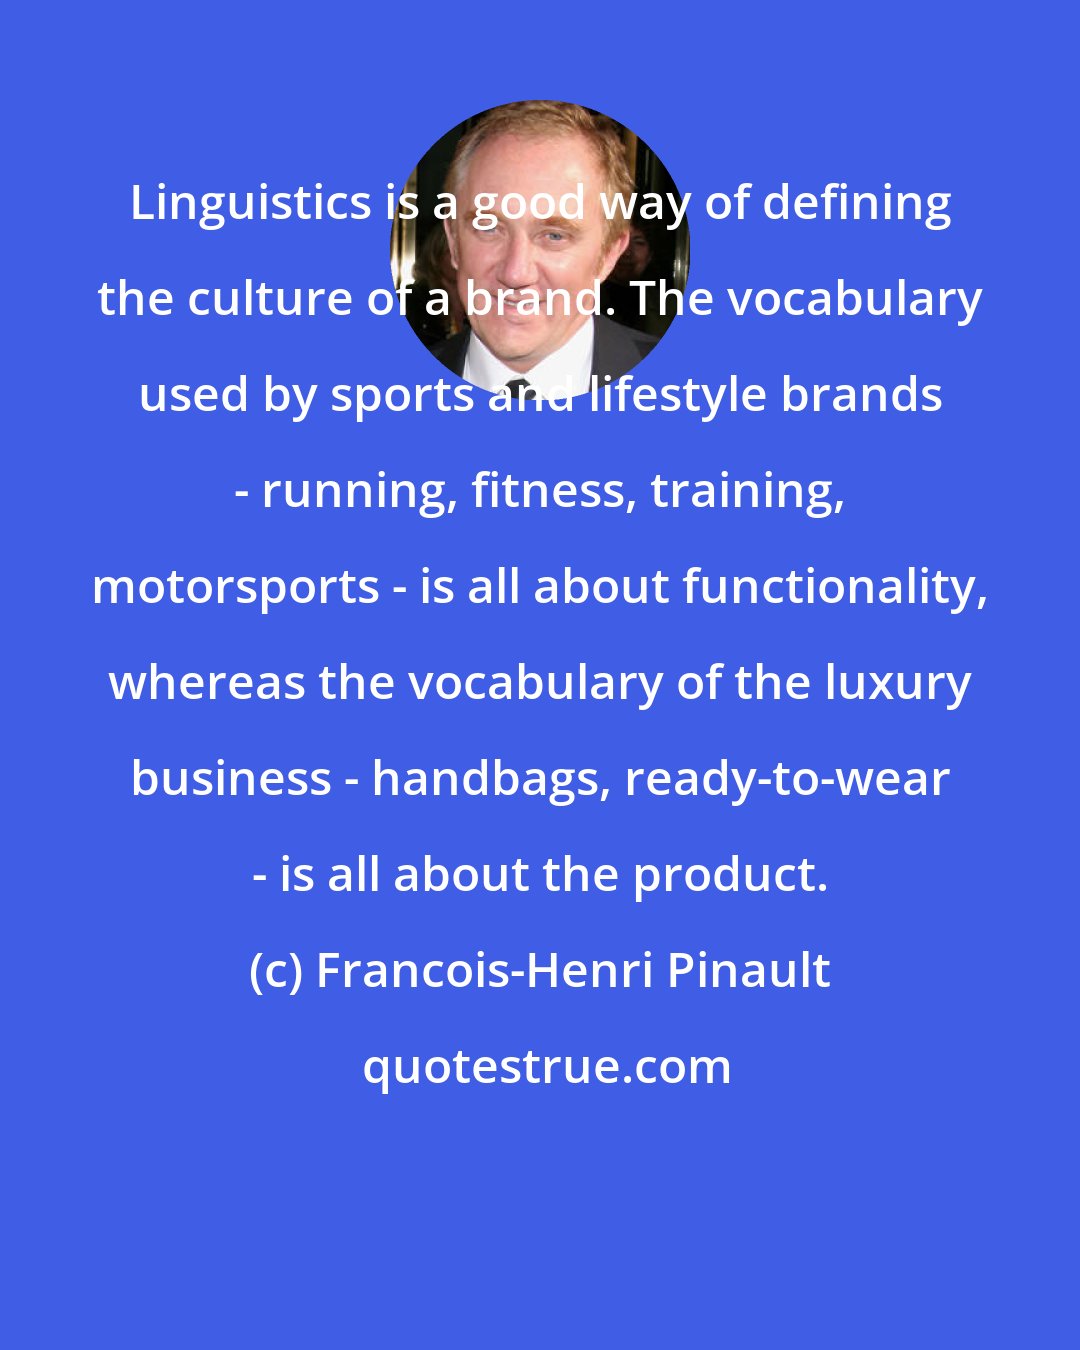 Francois-Henri Pinault: Linguistics is a good way of defining the culture of a brand. The vocabulary used by sports and lifestyle brands - running, fitness, training, motorsports - is all about functionality, whereas the vocabulary of the luxury business - handbags, ready-to-wear - is all about the product.